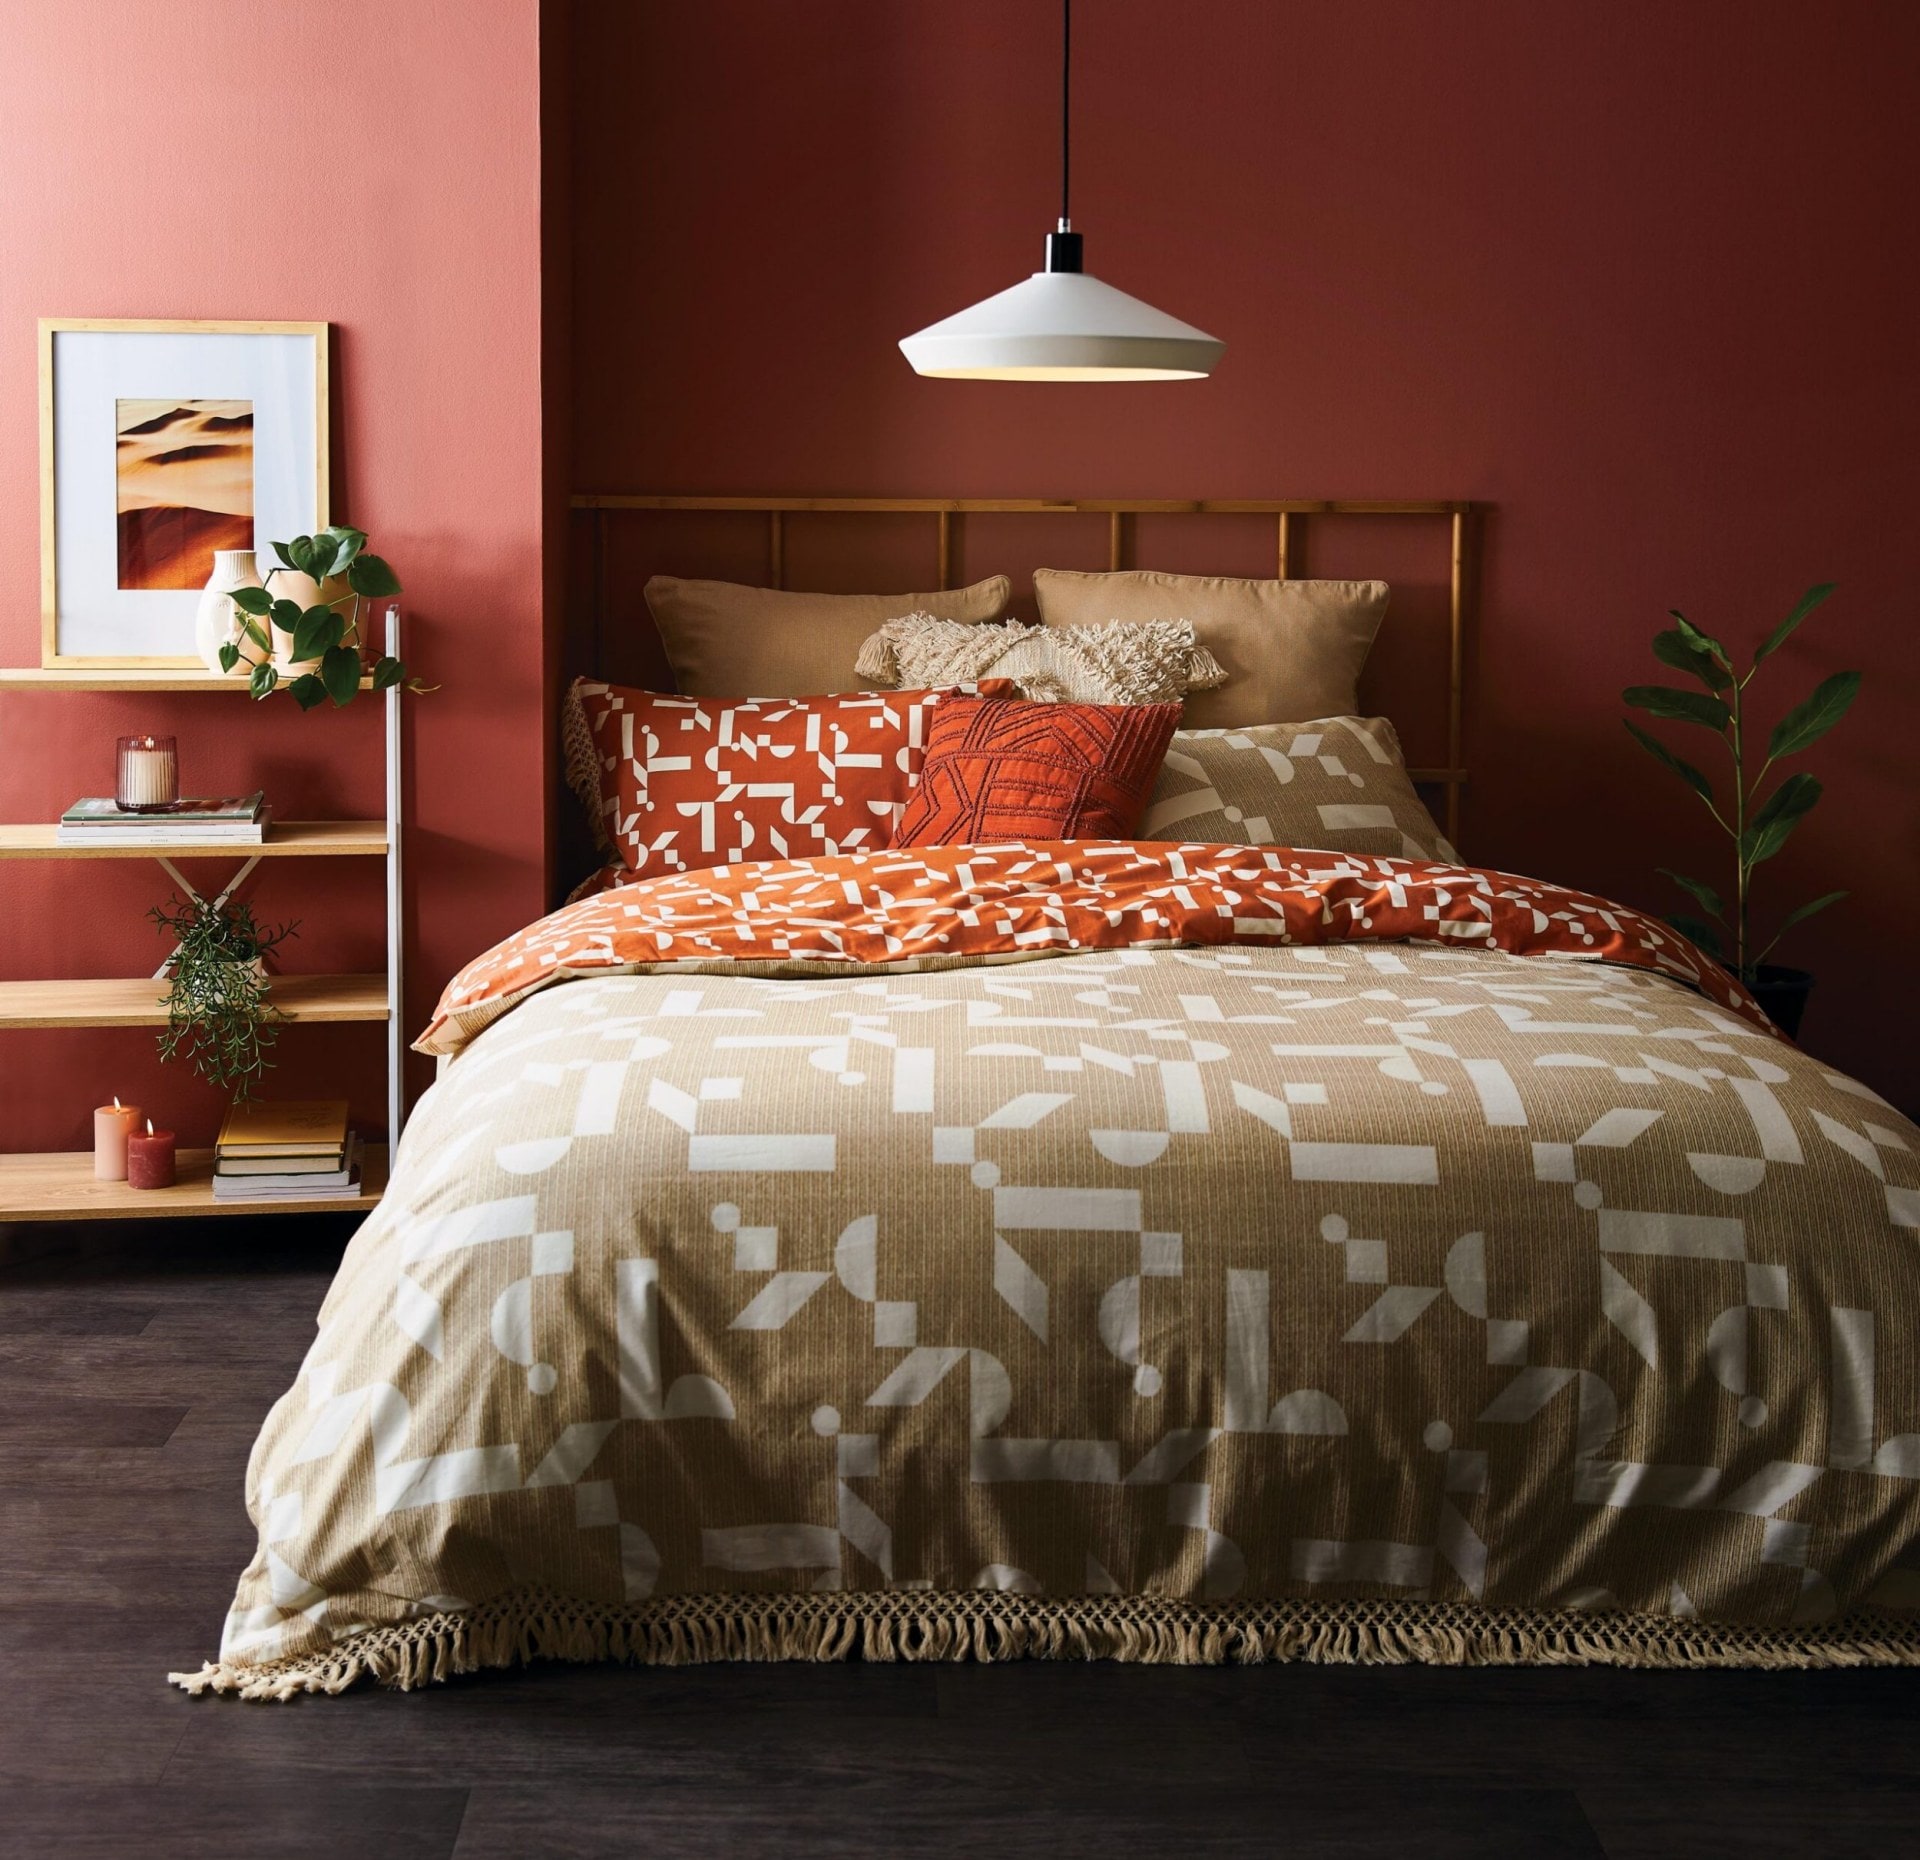 Kas Tiller Duvet Cover Sets, from $149.99, and Kas Daffie Natural Cushion, $79.99, from Briscoes.